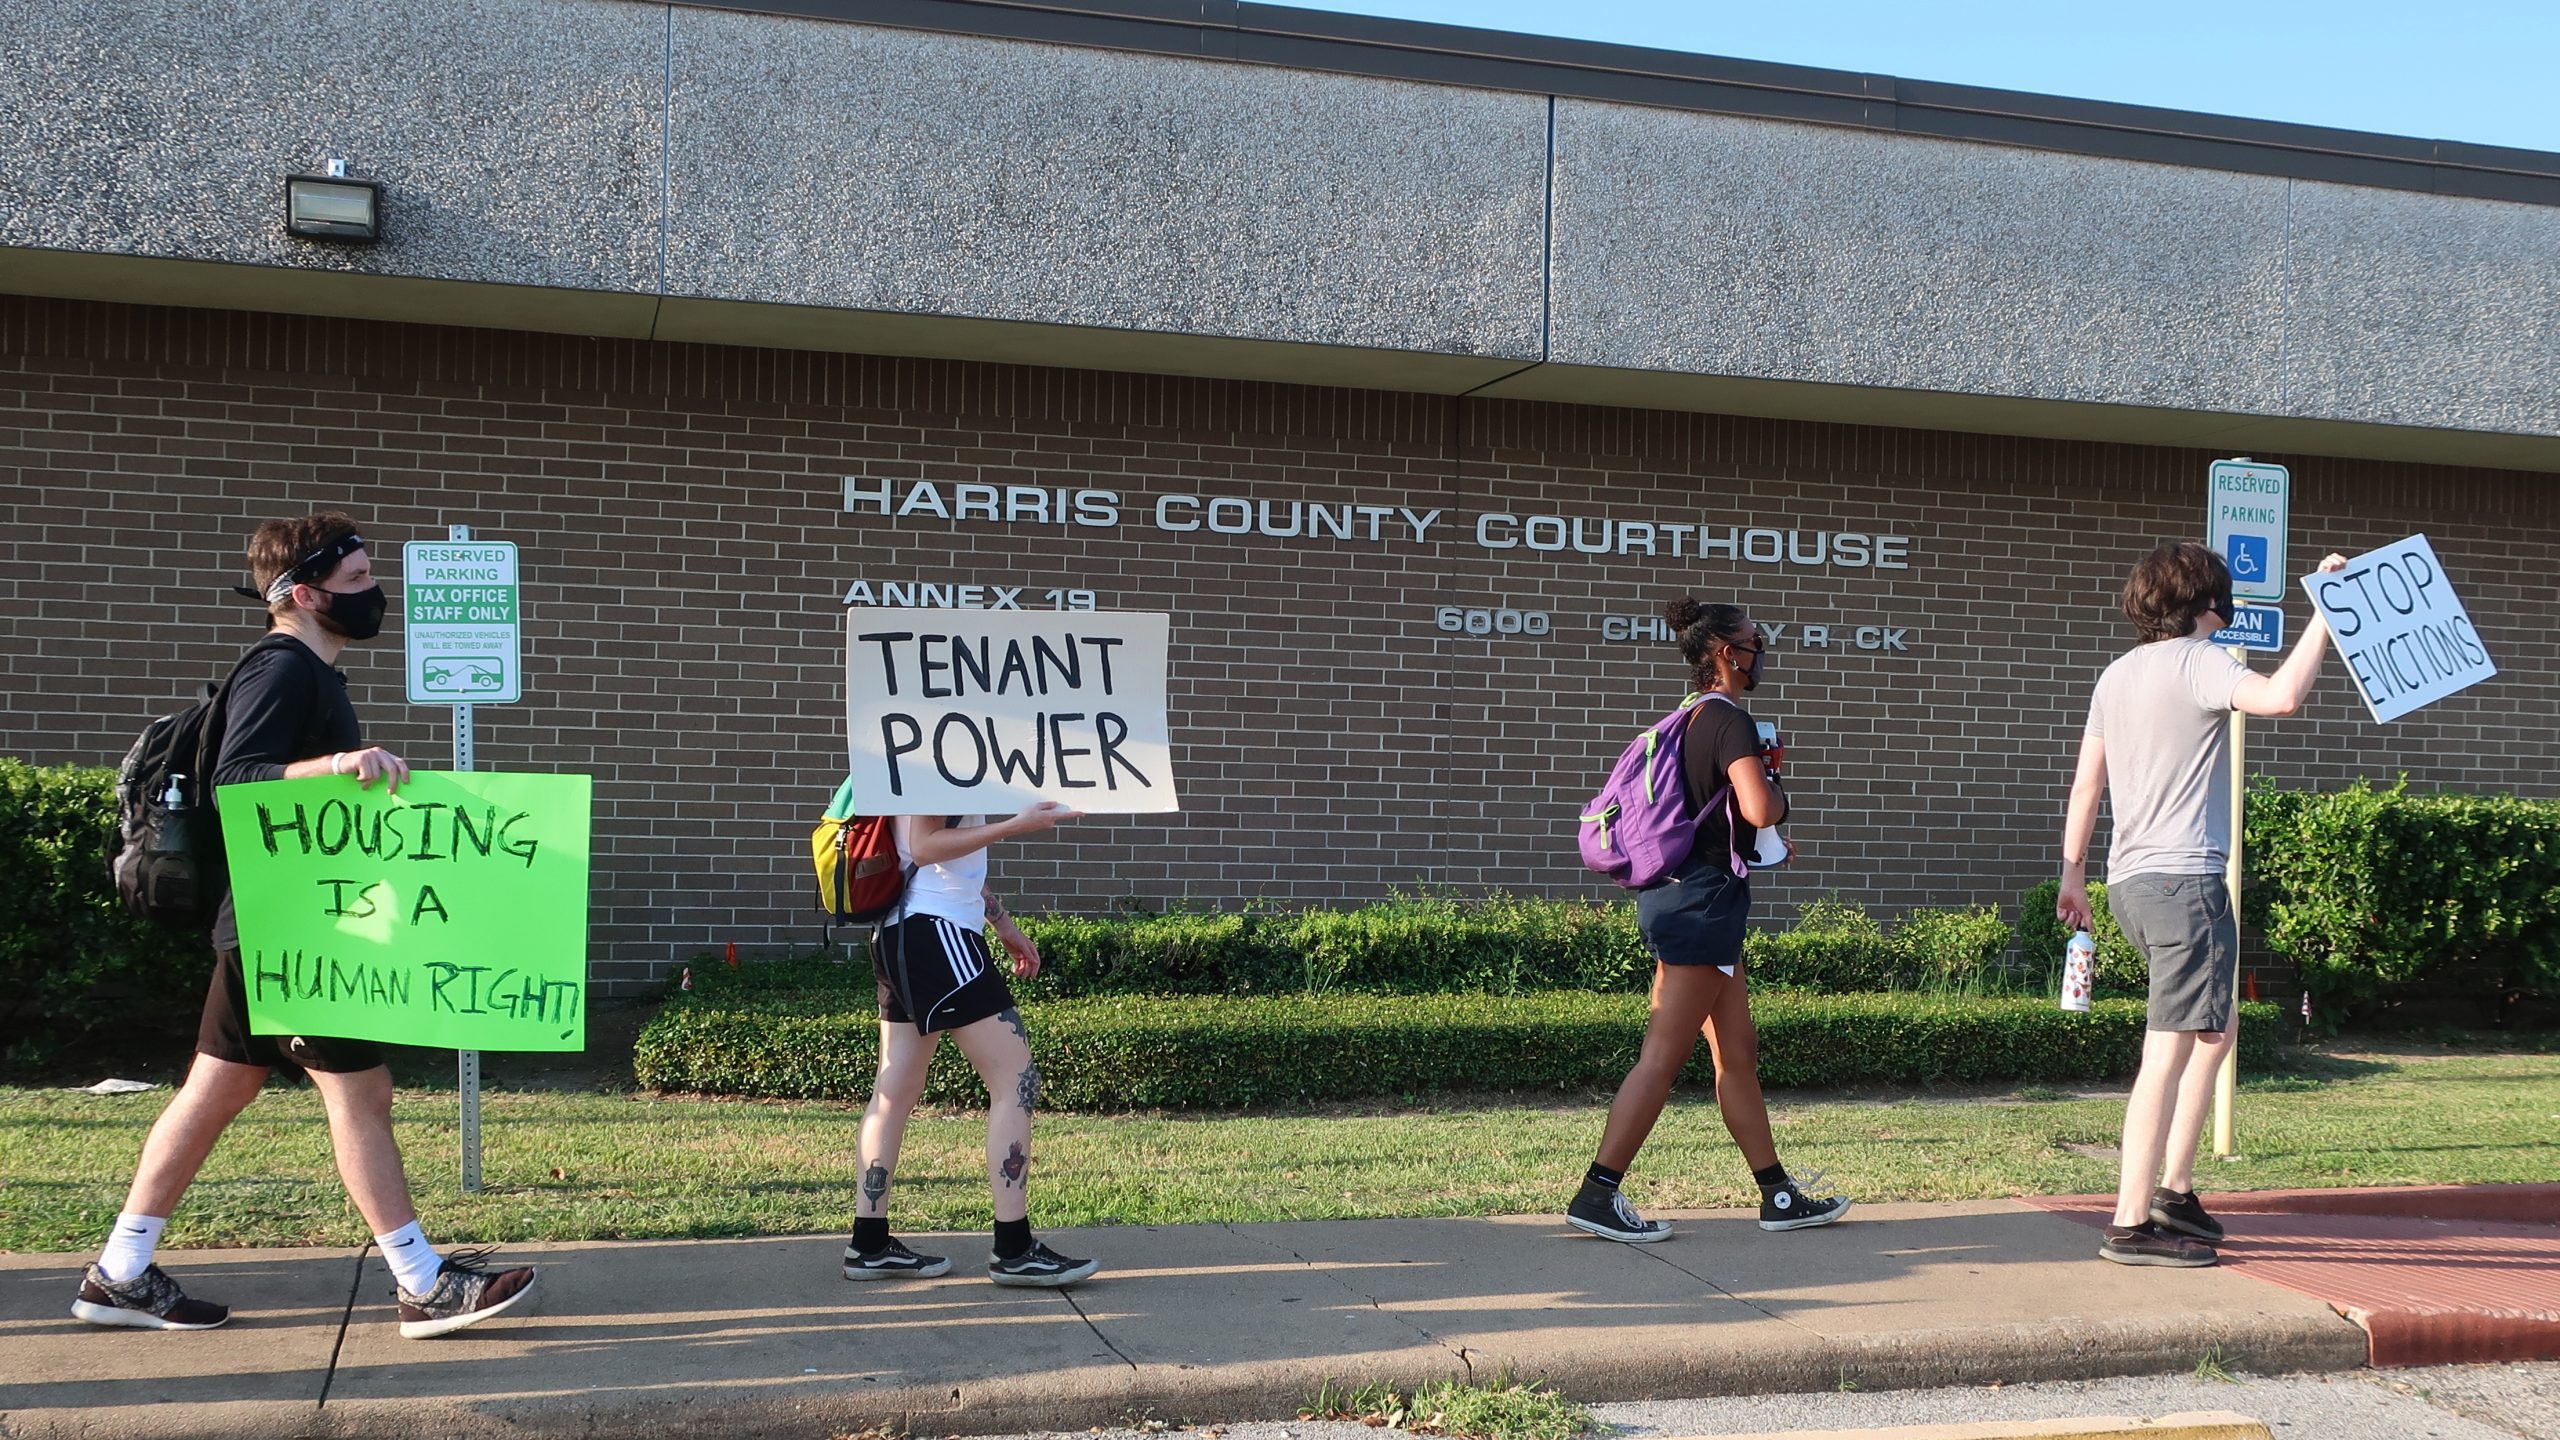 Protesters march Aug. 21 outside a courthouse in Houston, where evictions are continuing despite a moratorium ordered recently by the Centers for Disease Control and Prevention.